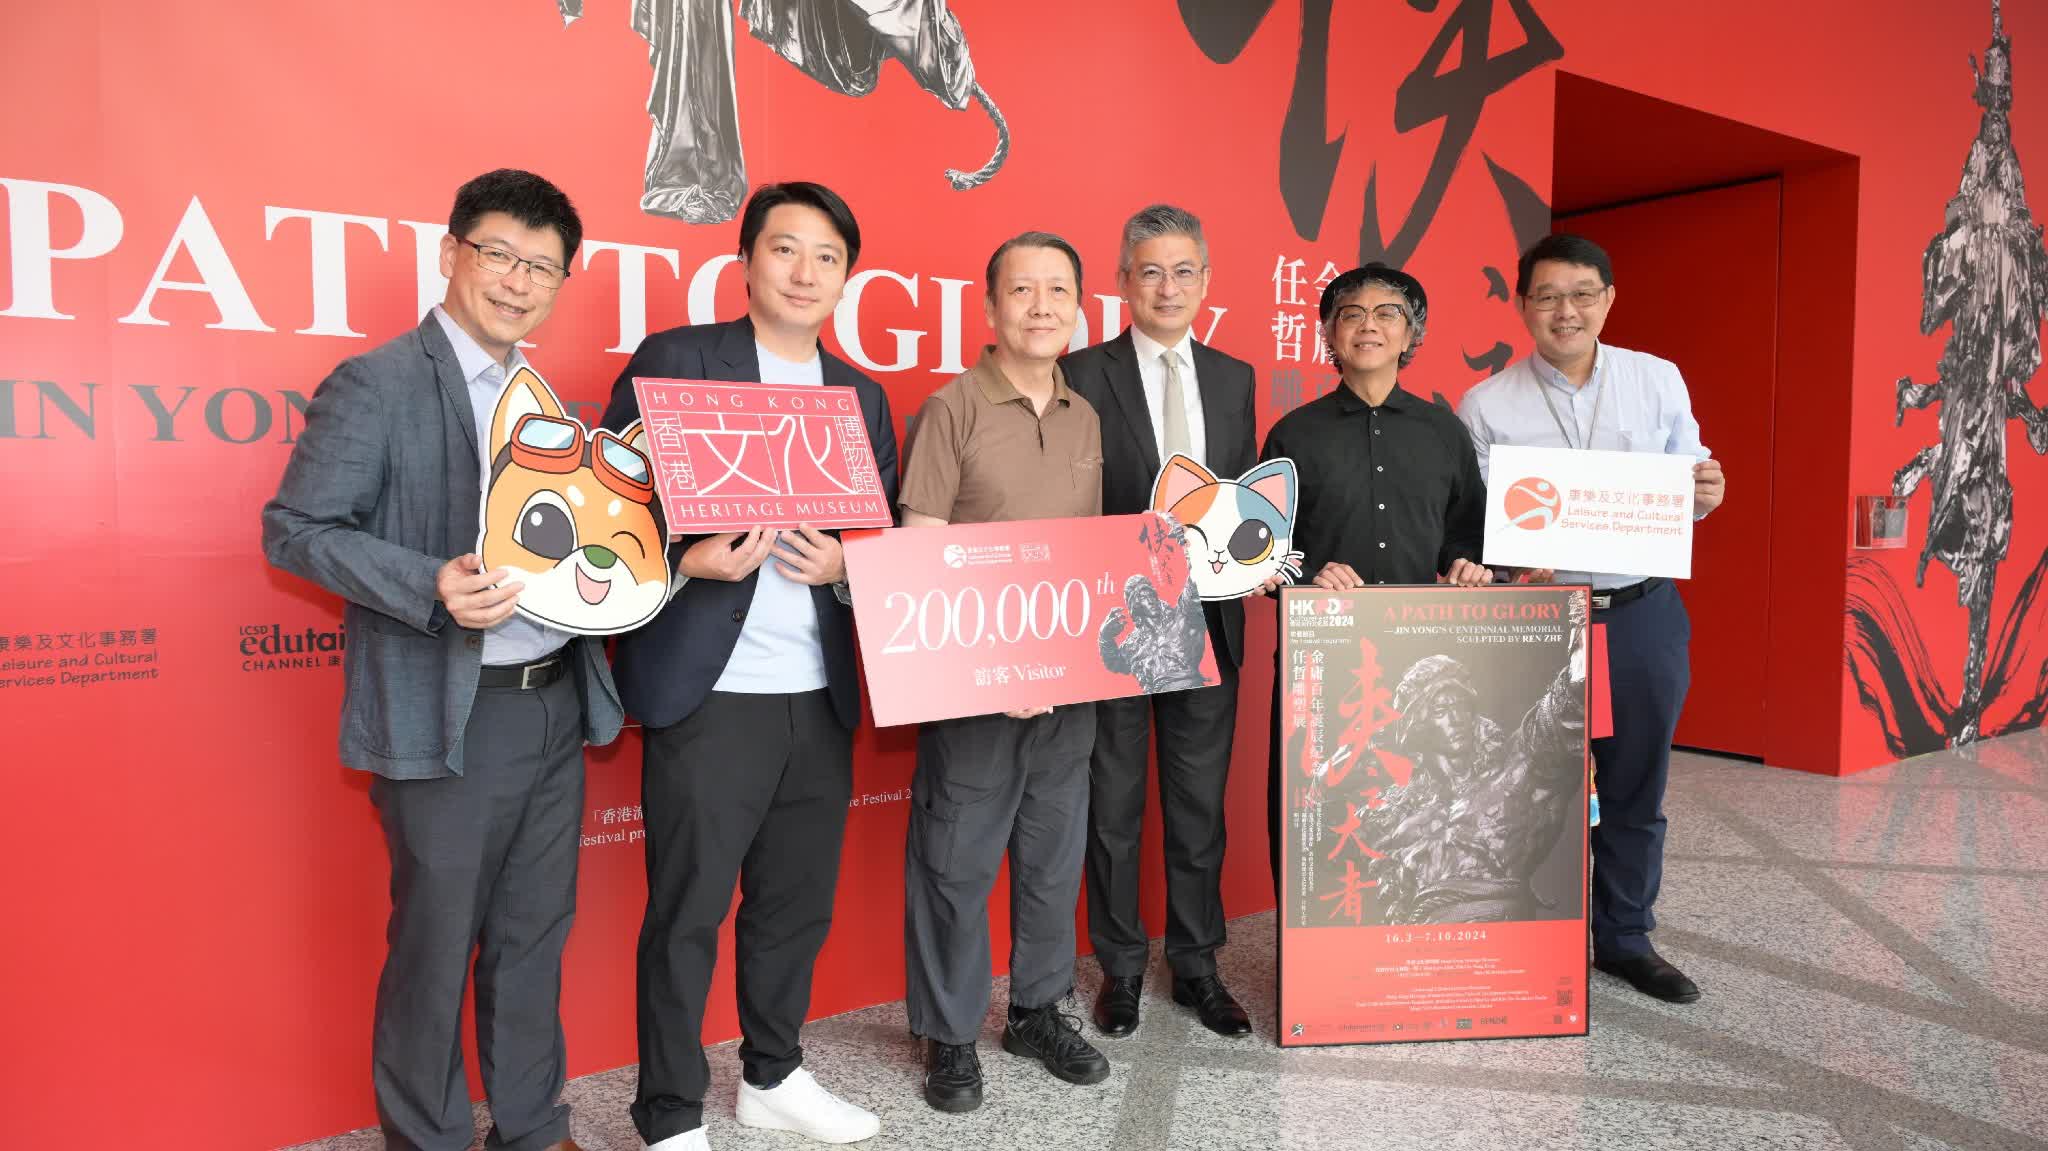 Heritage Museum's 'A Path to Glory - Jin Yong's Centennial Memorial, Sculpted by Ren Zhe' exhibition receives its 200,000th visitor